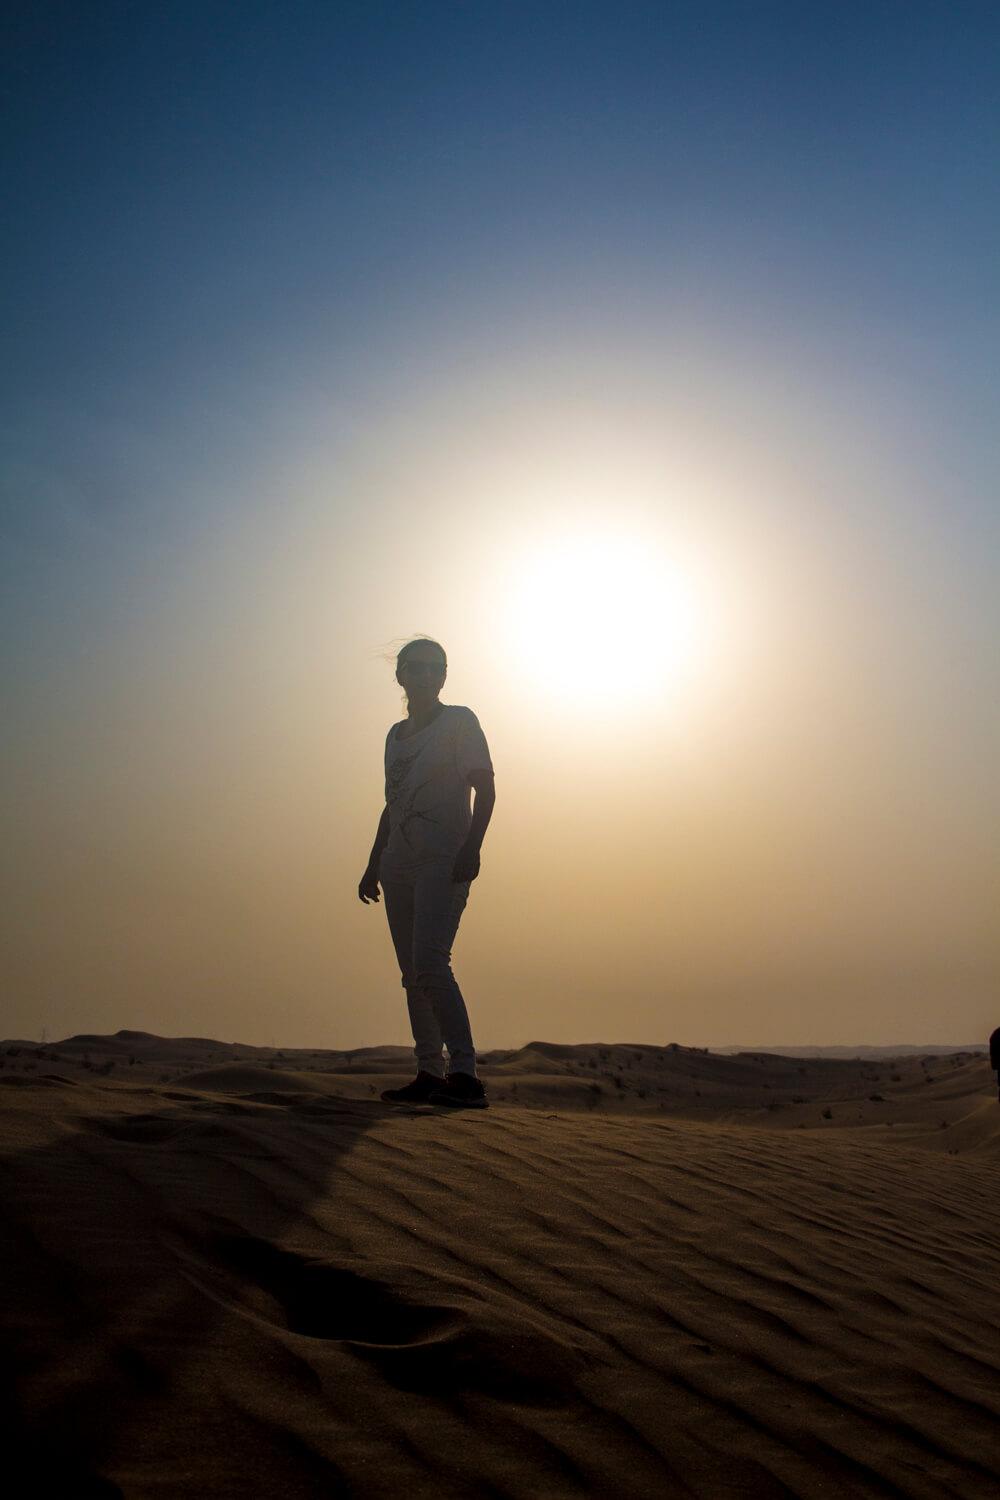 A person stood in the desert looking out past the camera with a sunset behind them